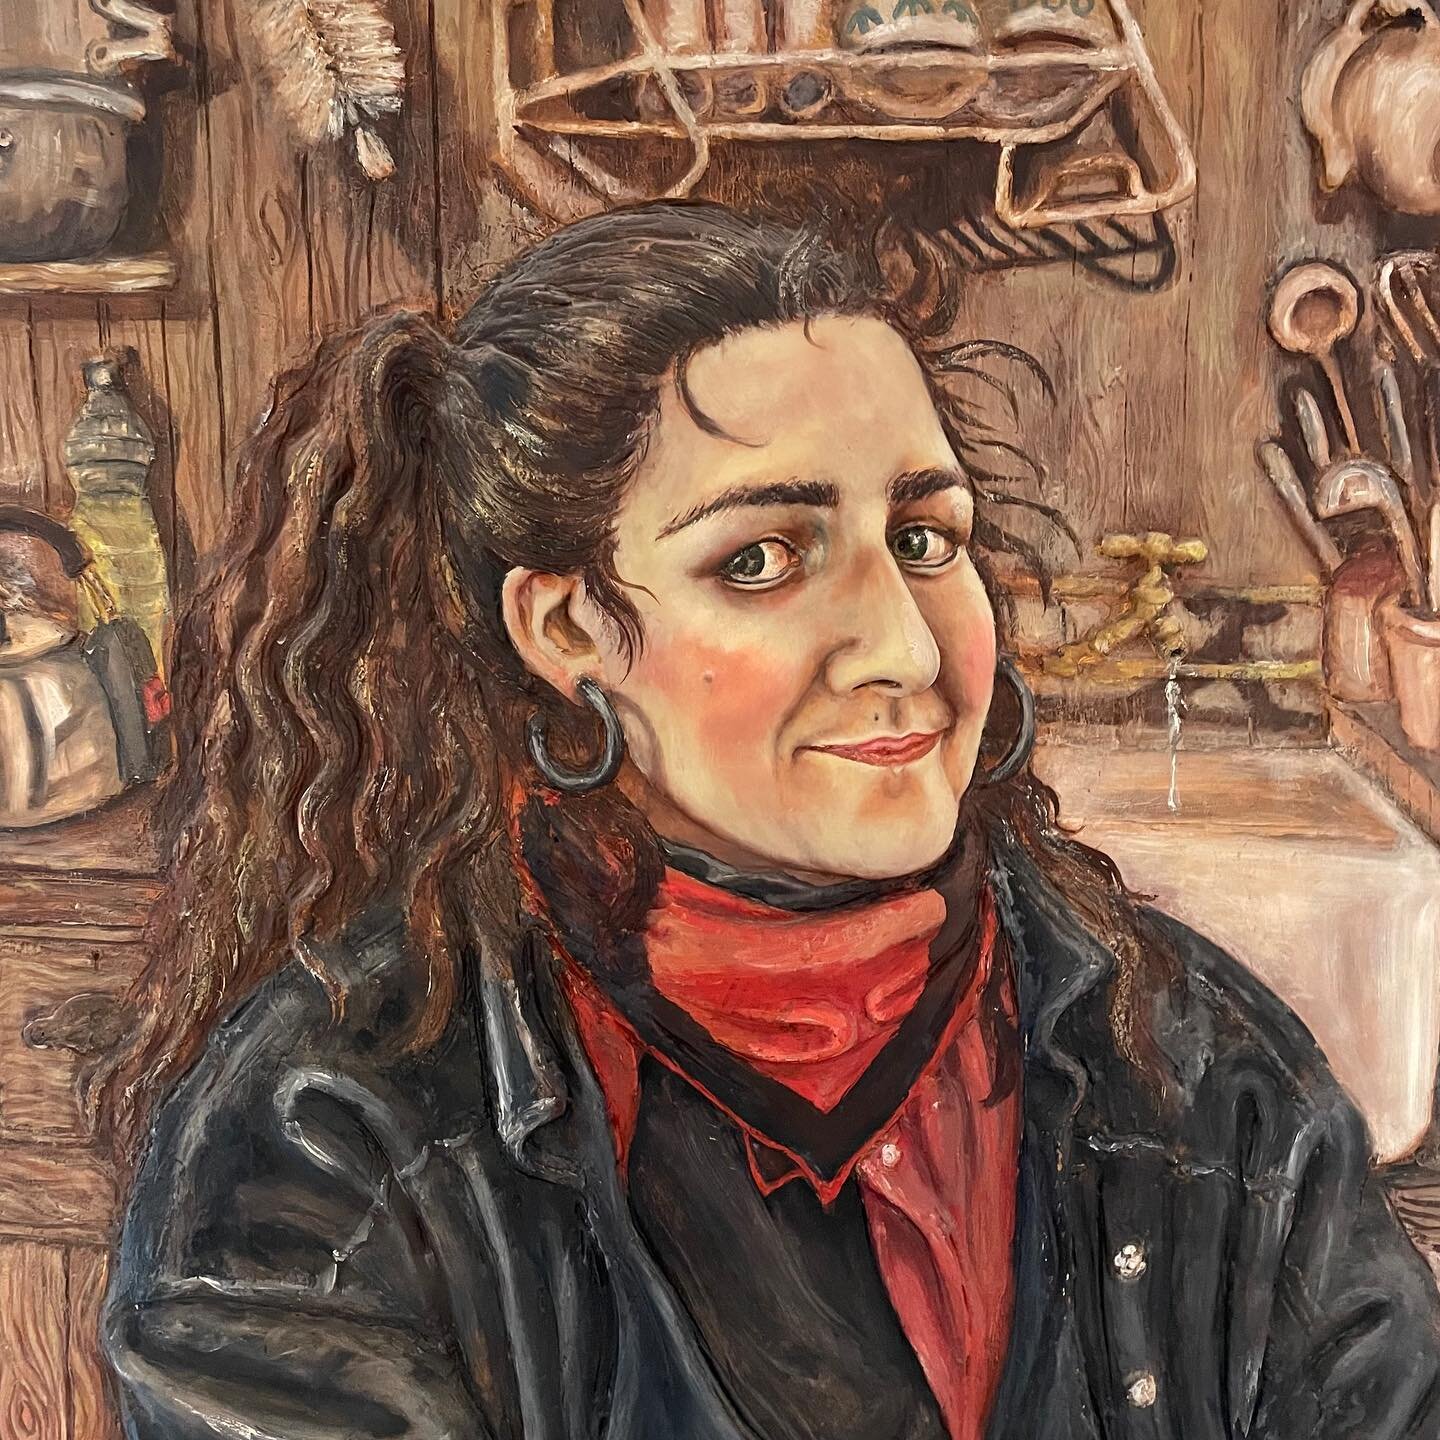 Re-living my youth.. flashback &ldquo;Self Portrait with salmon &amp; cream cheese bagel with coffee&rdquo; updated profile pic (today).. this relief was exhibited in the National Portrait gallery BP awards, 1991. Wearing a leather jacket &amp; lace-